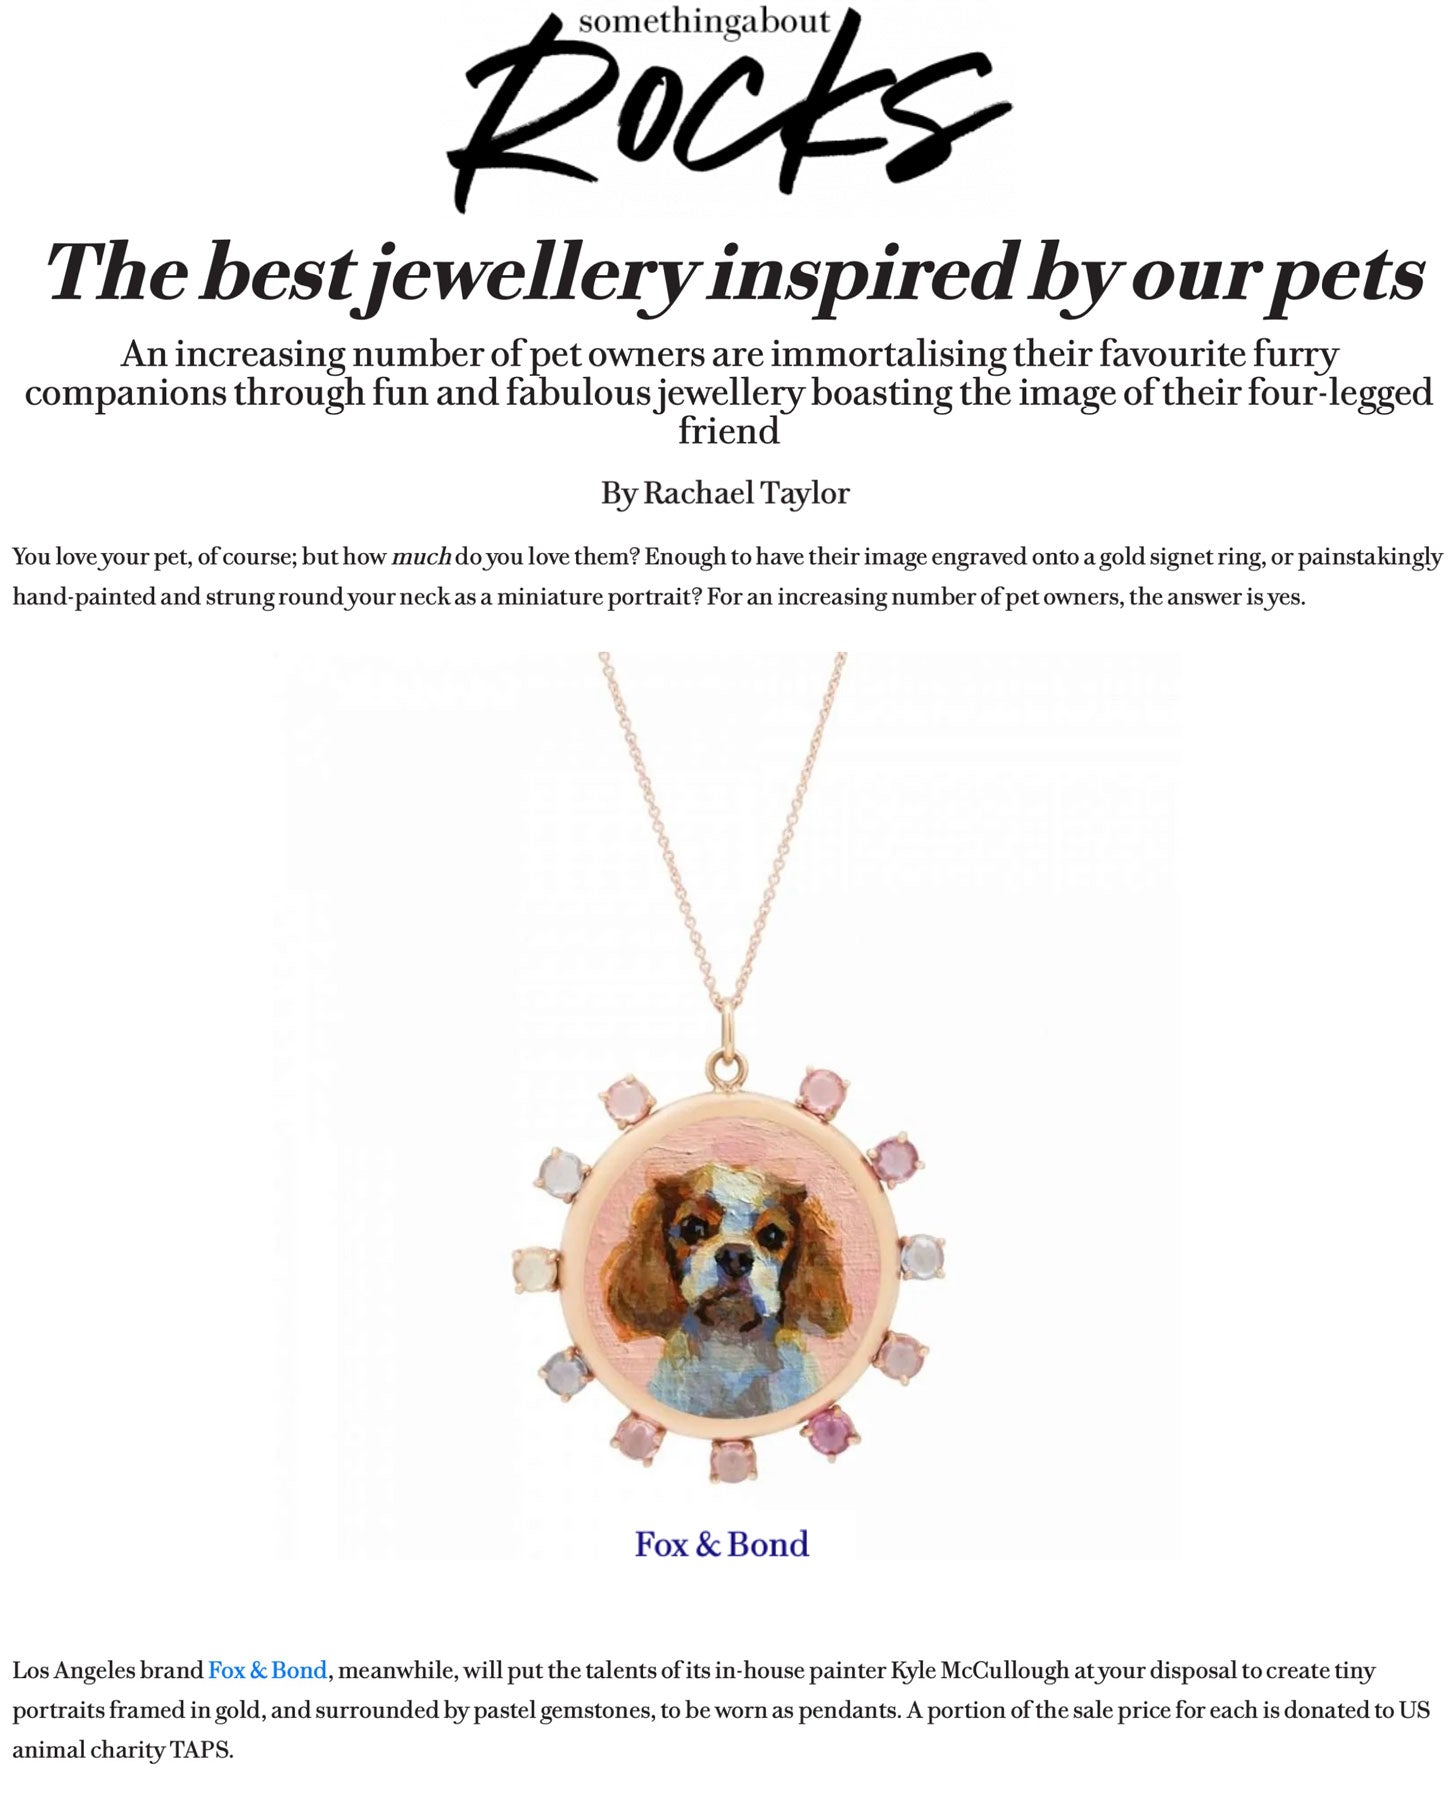 Something About Rocks: The best jewellery inspired by our pets